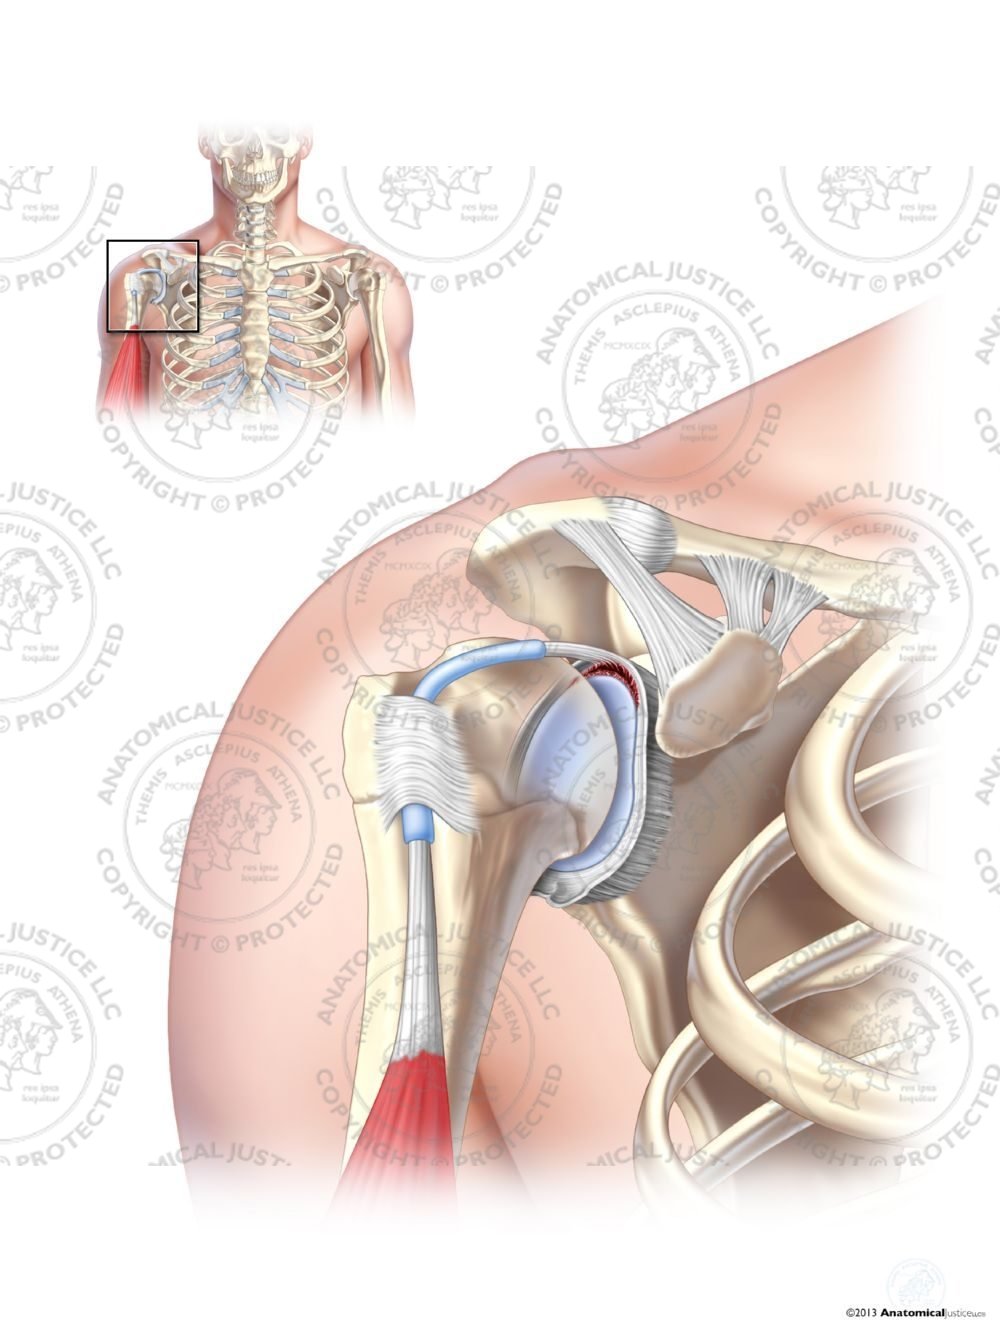 Type II SLAP Tear of the Right Labrum – No Text